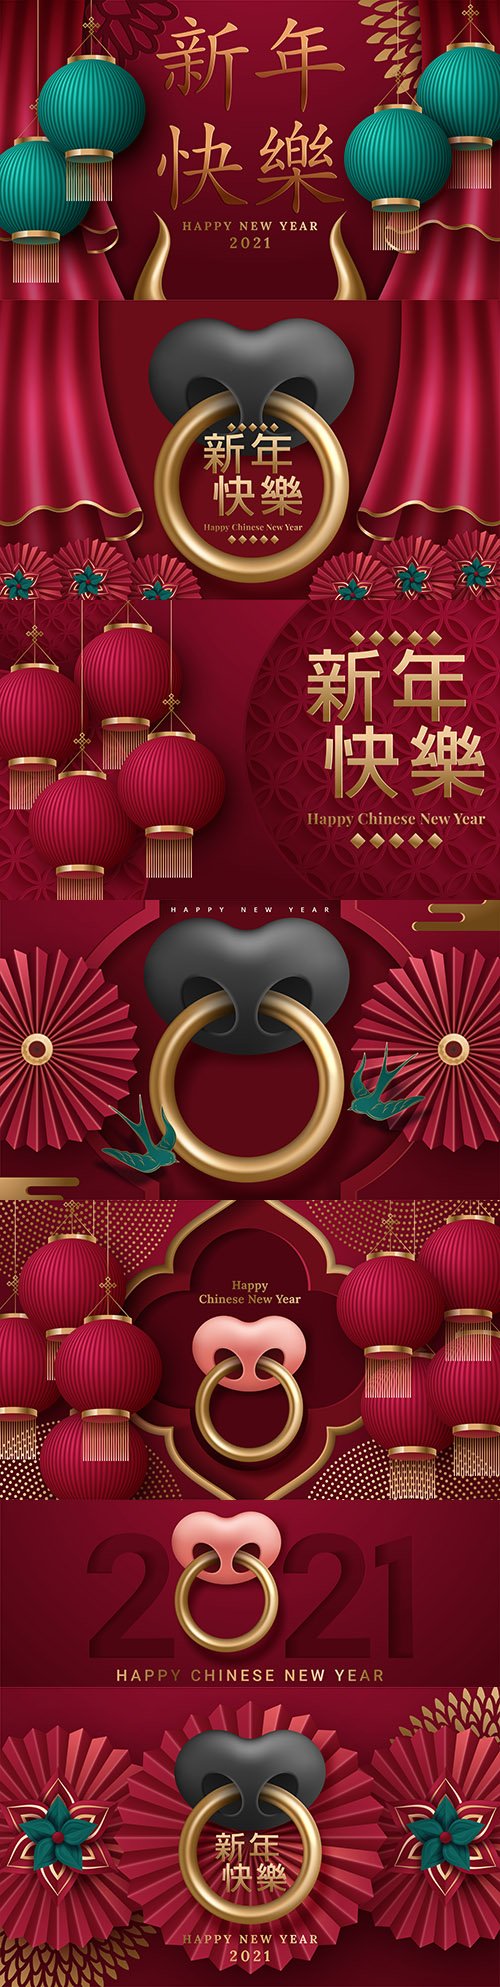 Happy Chinese New Year flower and lantern decorative design 2